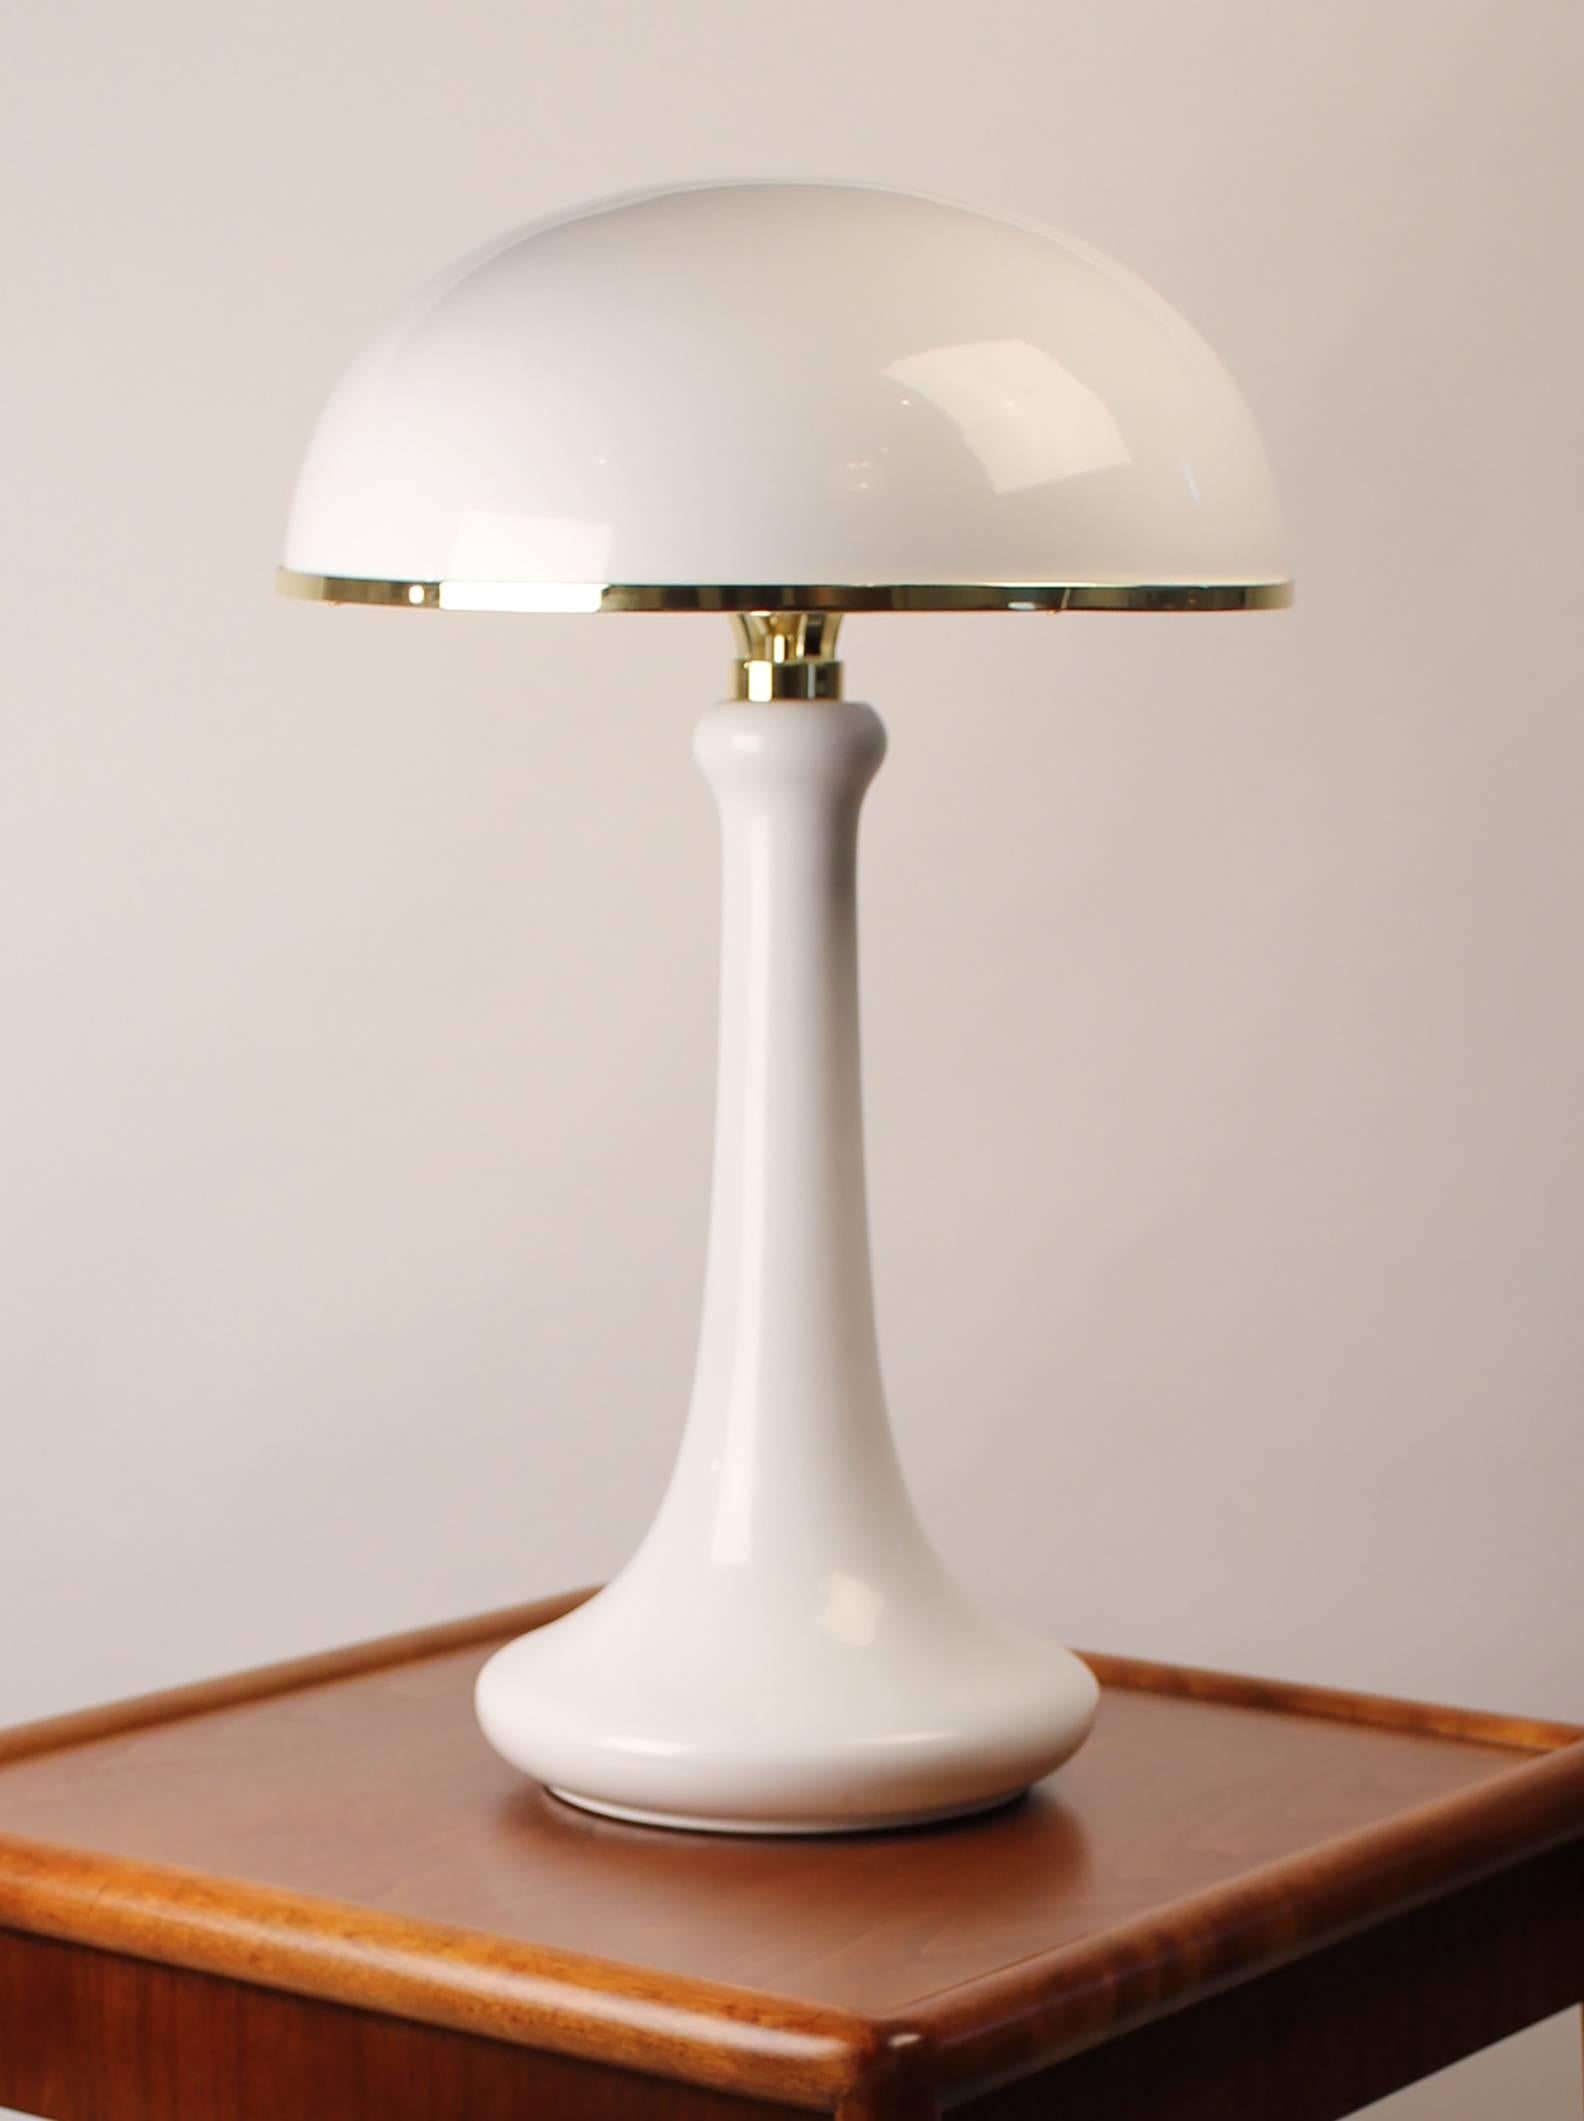 Later production John Dickinson table lamp with lacquered dome shade and brass embellishments. UL listed. Licensed Edition from the 1975 design. Excellent condition. Works with a 50-150 watt bulb.